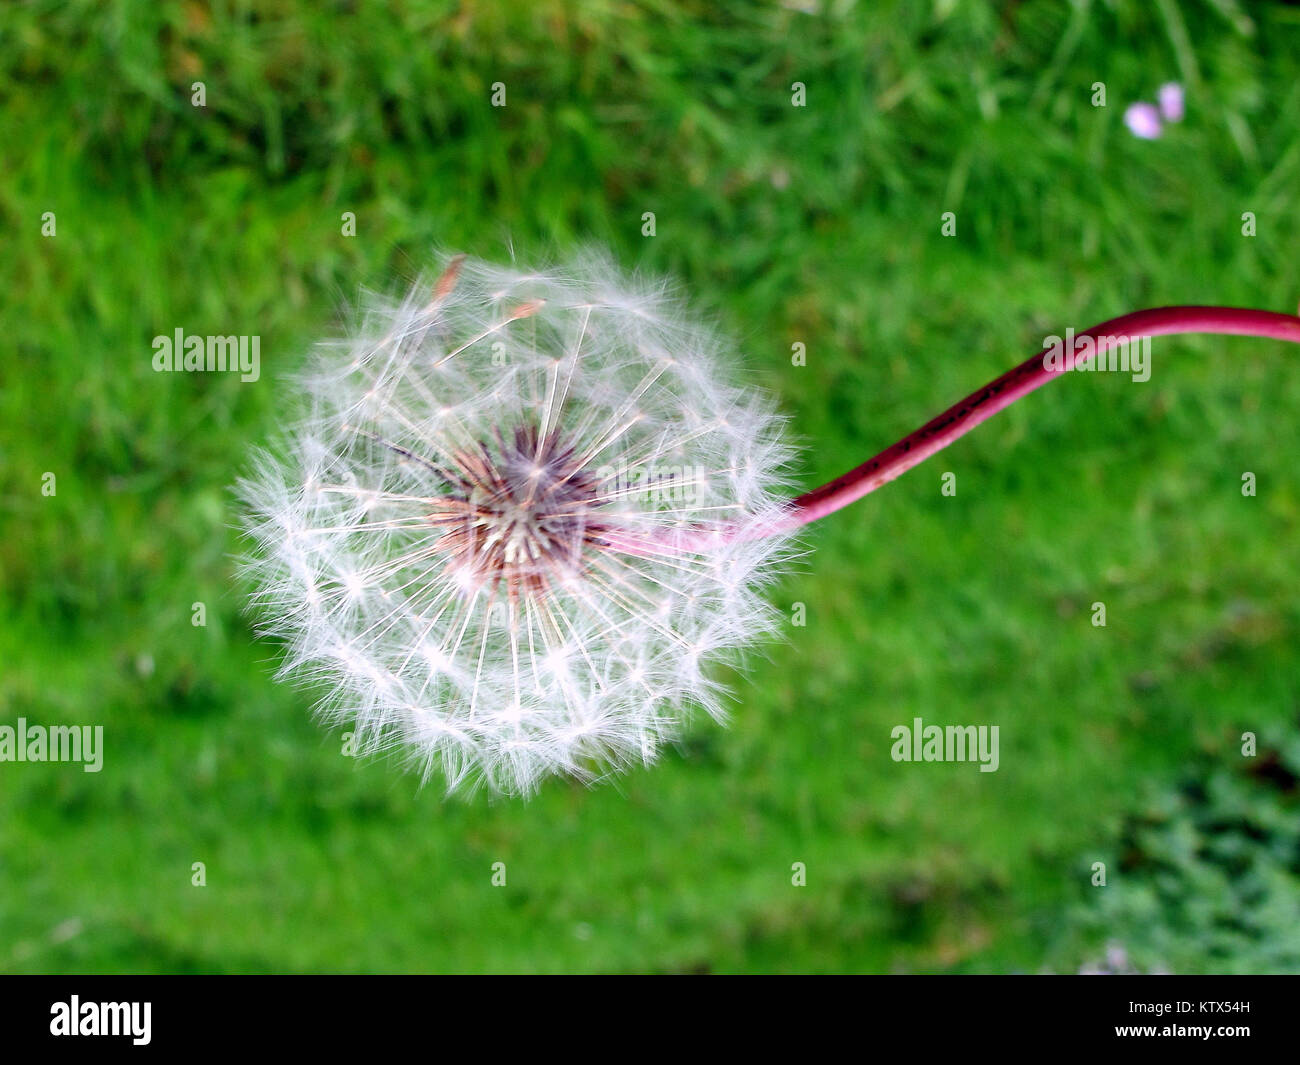 Dandelion with curved crooked stem green grass background Stock Photo